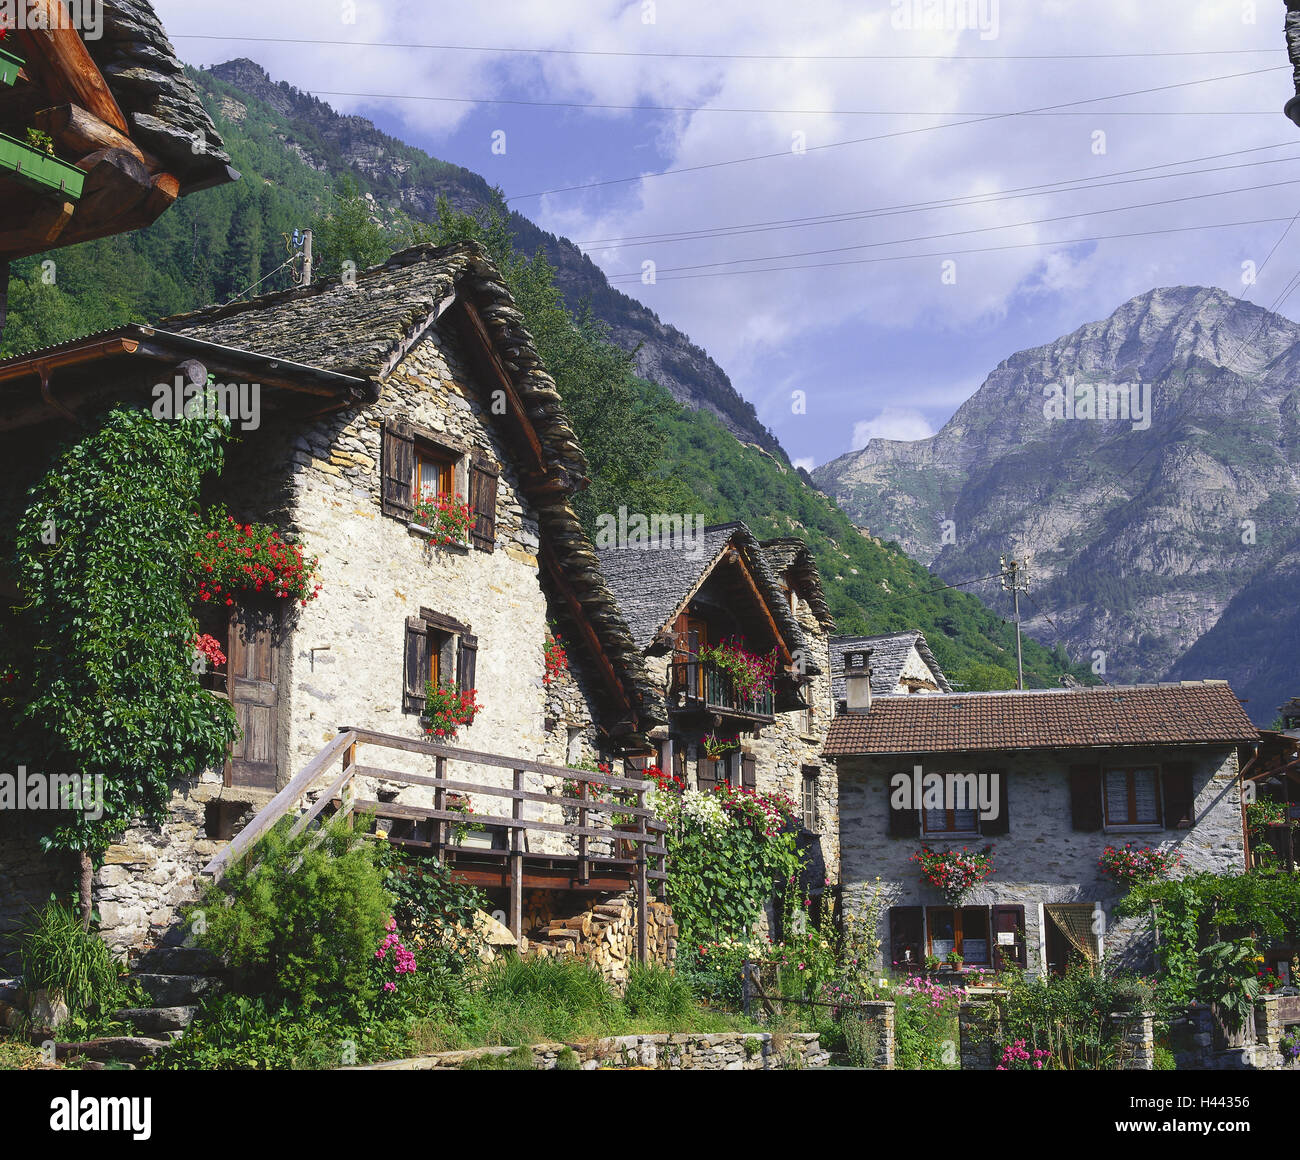 Switzerland, Ticino, mountain village Sonogno, houses, old, Europe, alp room, place, village, residential houses, stone houses, stone structure way, typically, flowers, summers, outside, deserted, building, architecture, heaven, clouds, Stock Photo